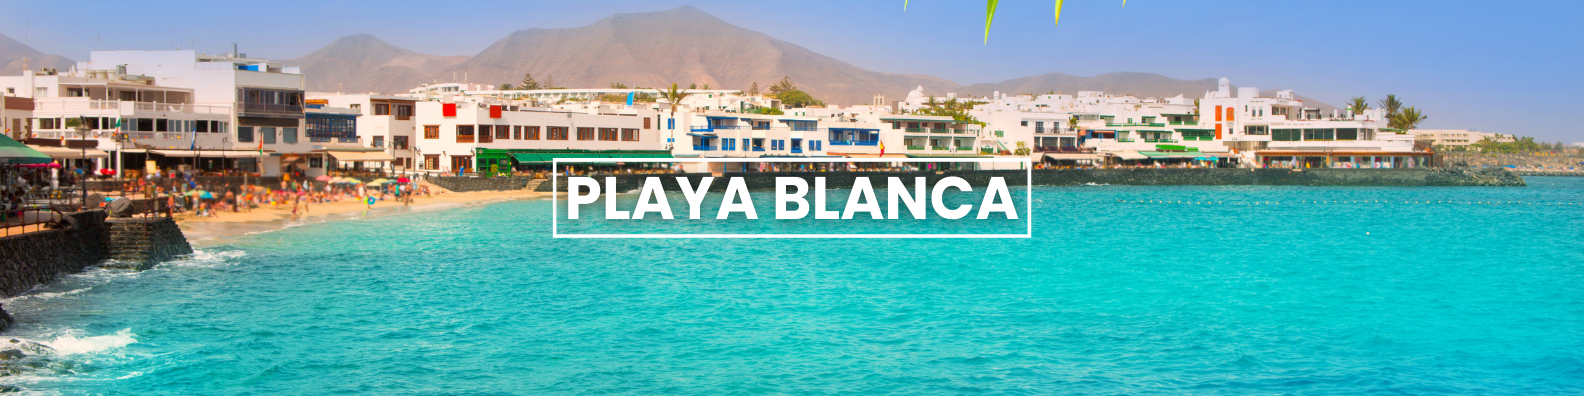 a picture of a beach with the words playa blanca written on it . Barter's Travelnet 